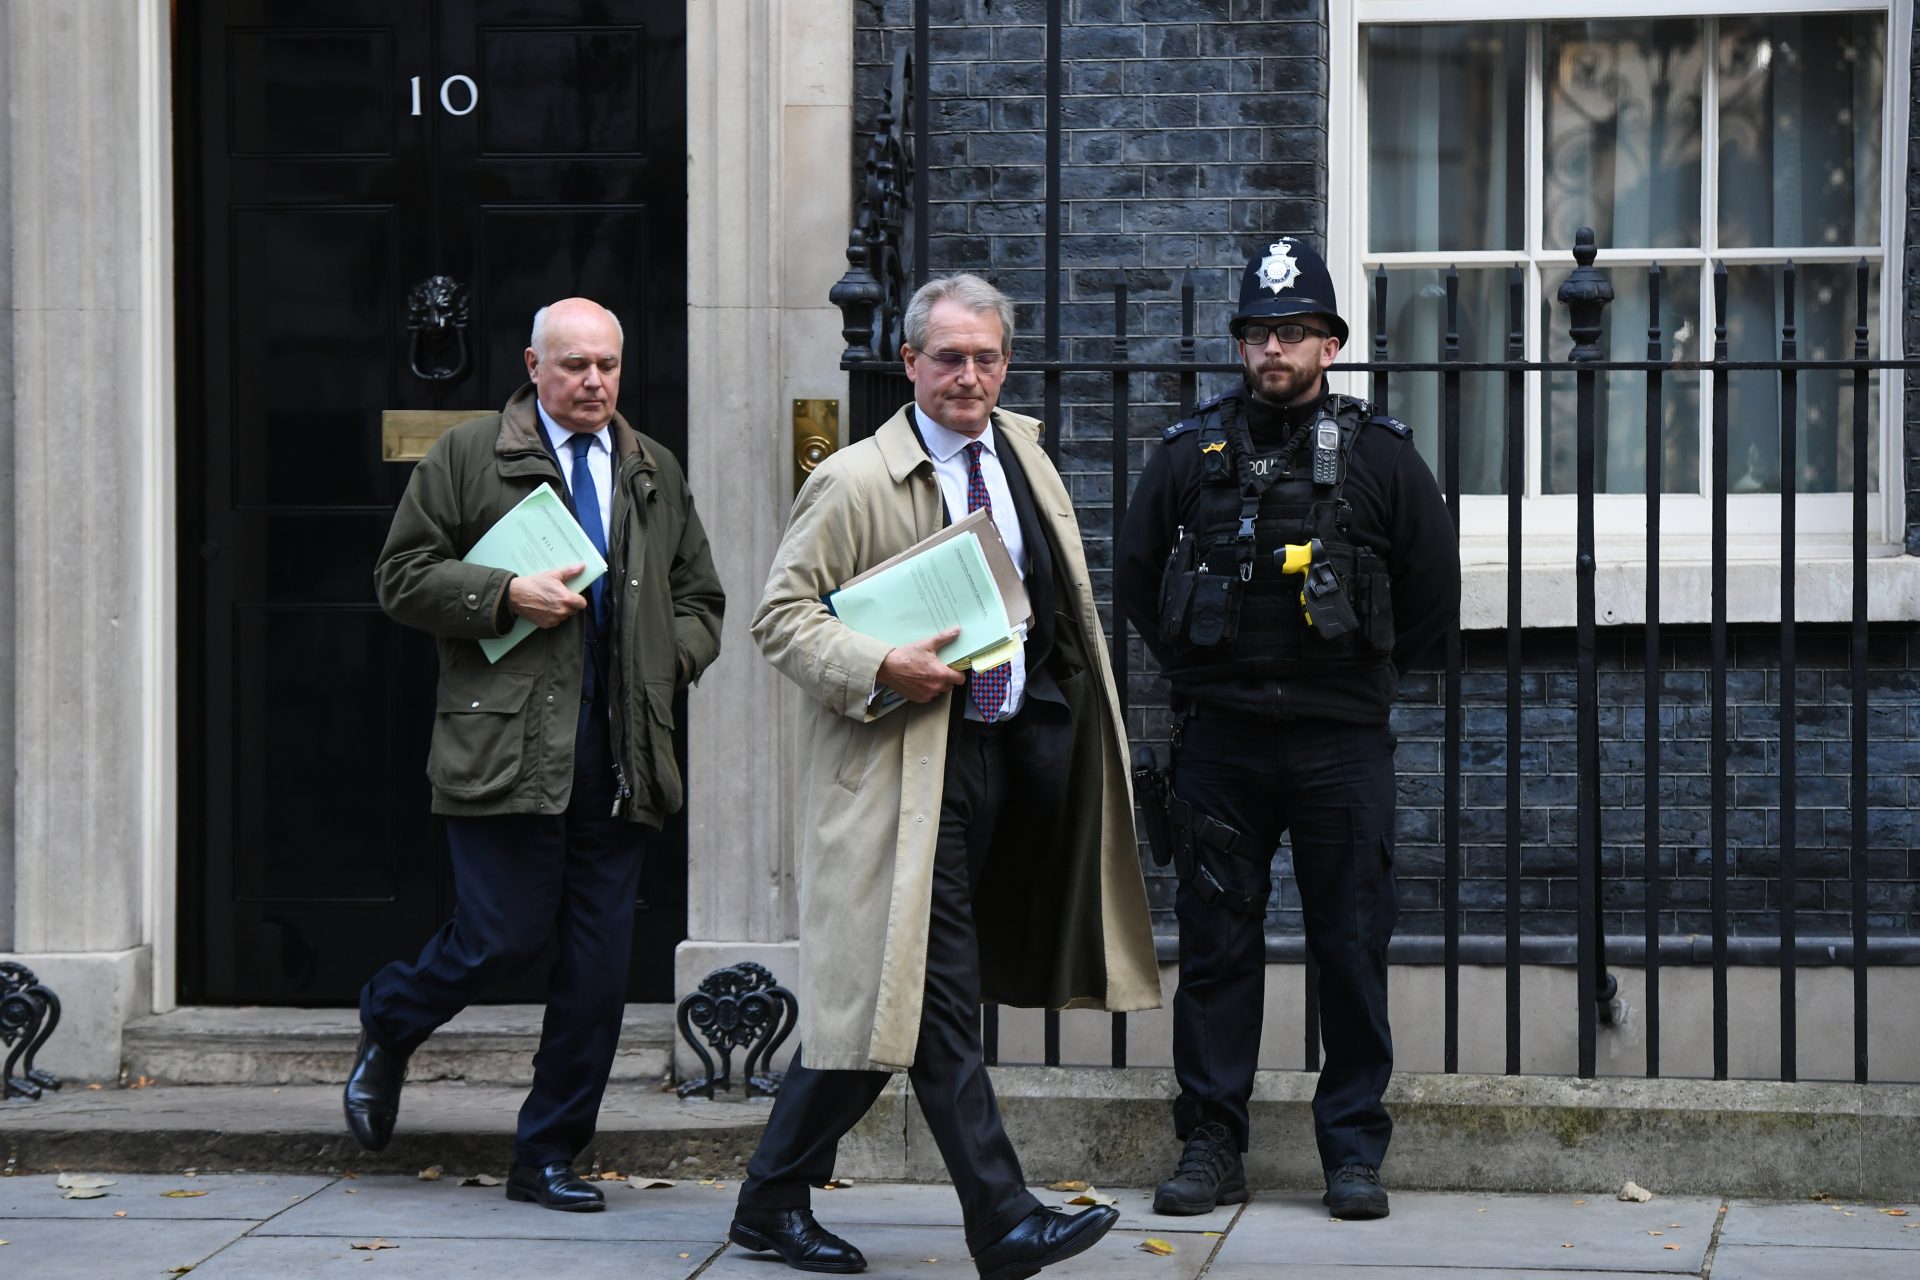 Iain Duncan Smith and Owen Paterson (right) leaving Downing Street, London after attending a meeting. Photograph: PA.